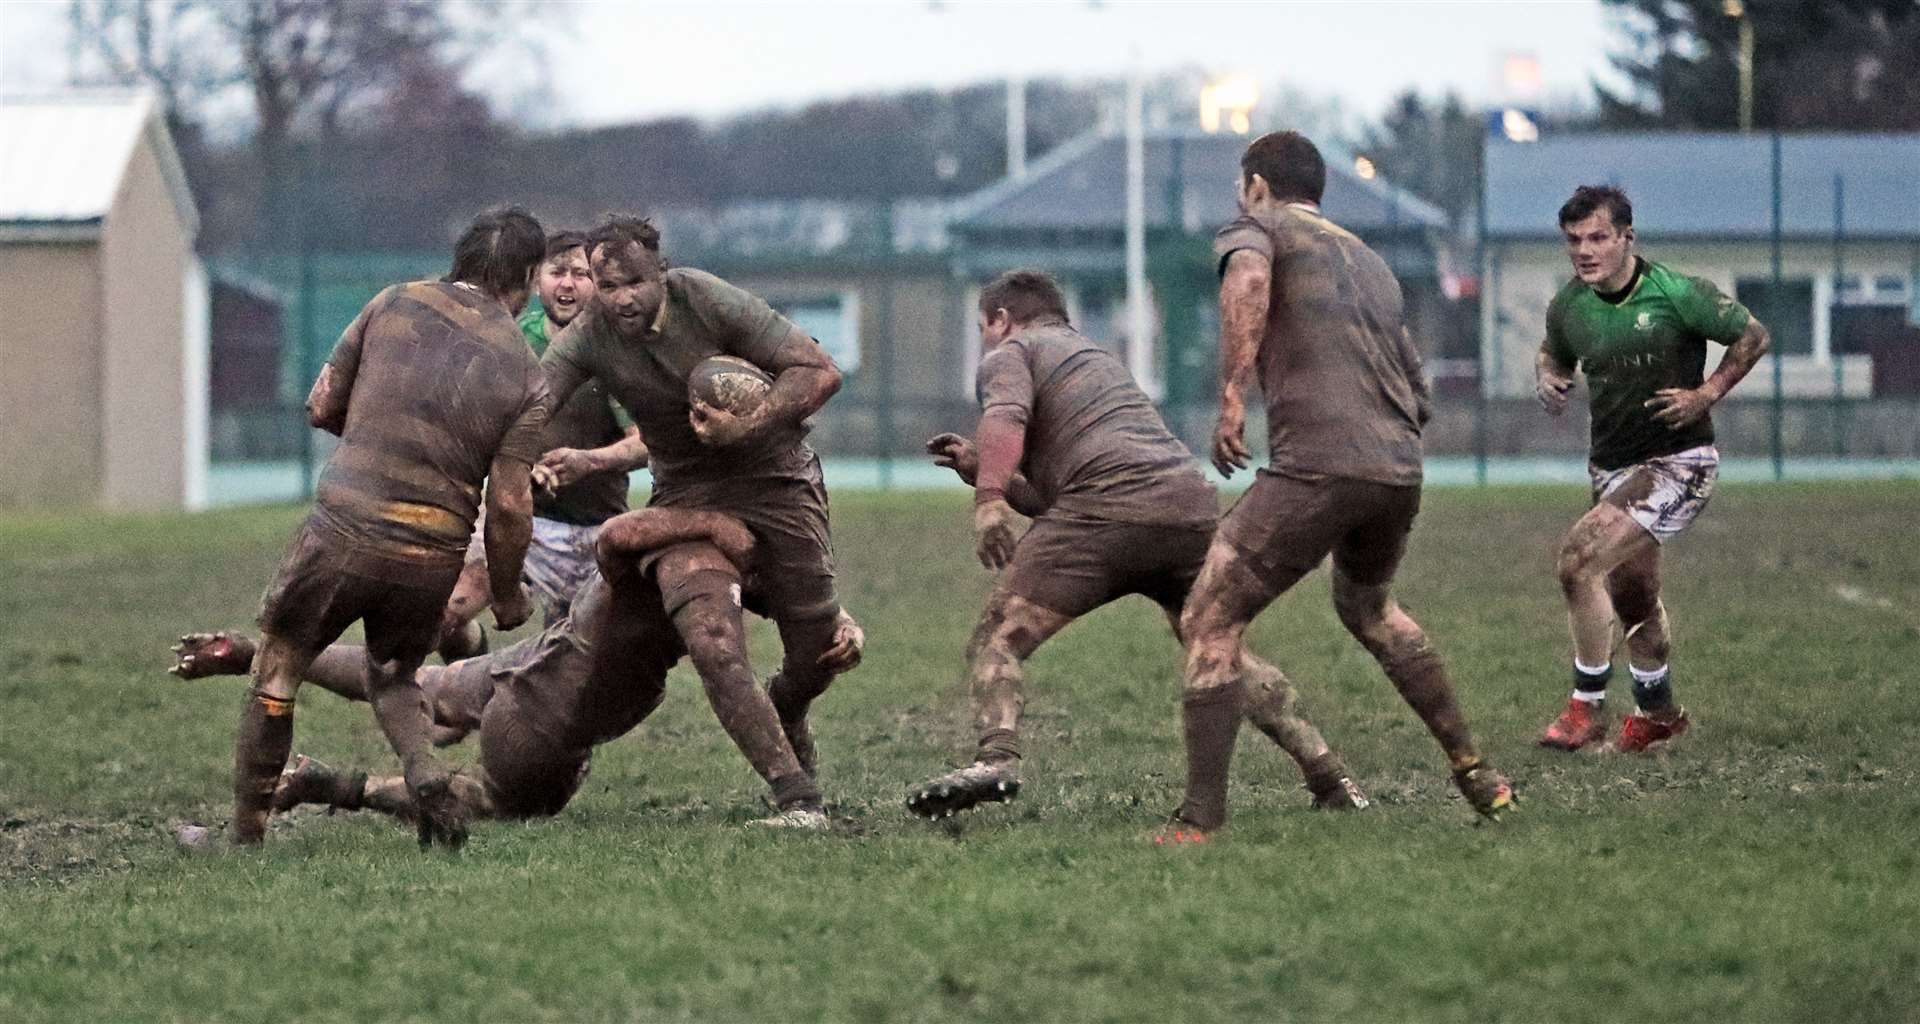 Grant Anderson is tackled as the muddy conditions make it difficult to distinguish one team from the other. Picture: James Gunn